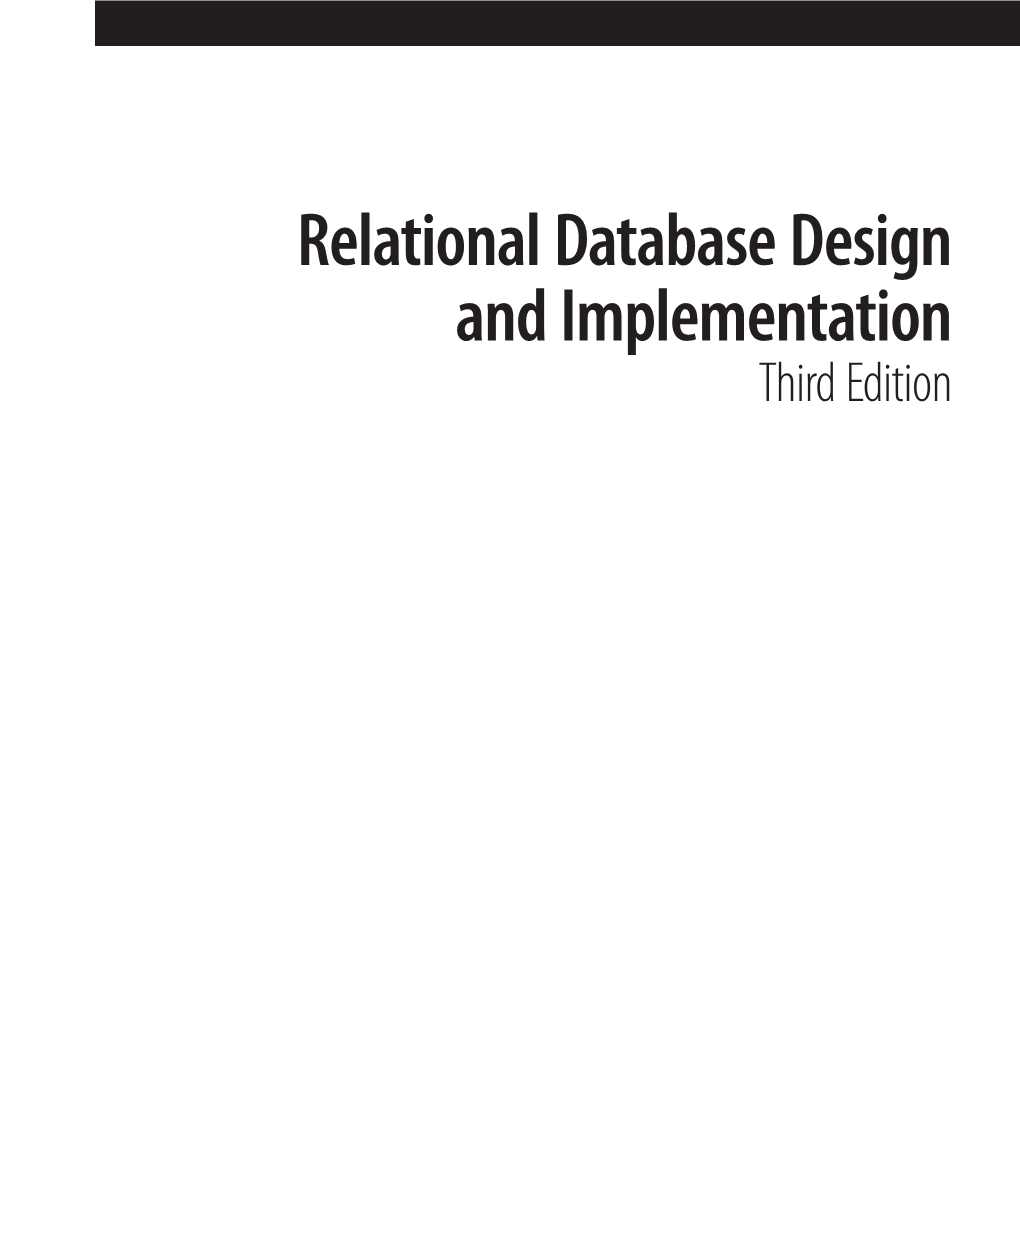 Relational Database Design and Implementation Third Edition